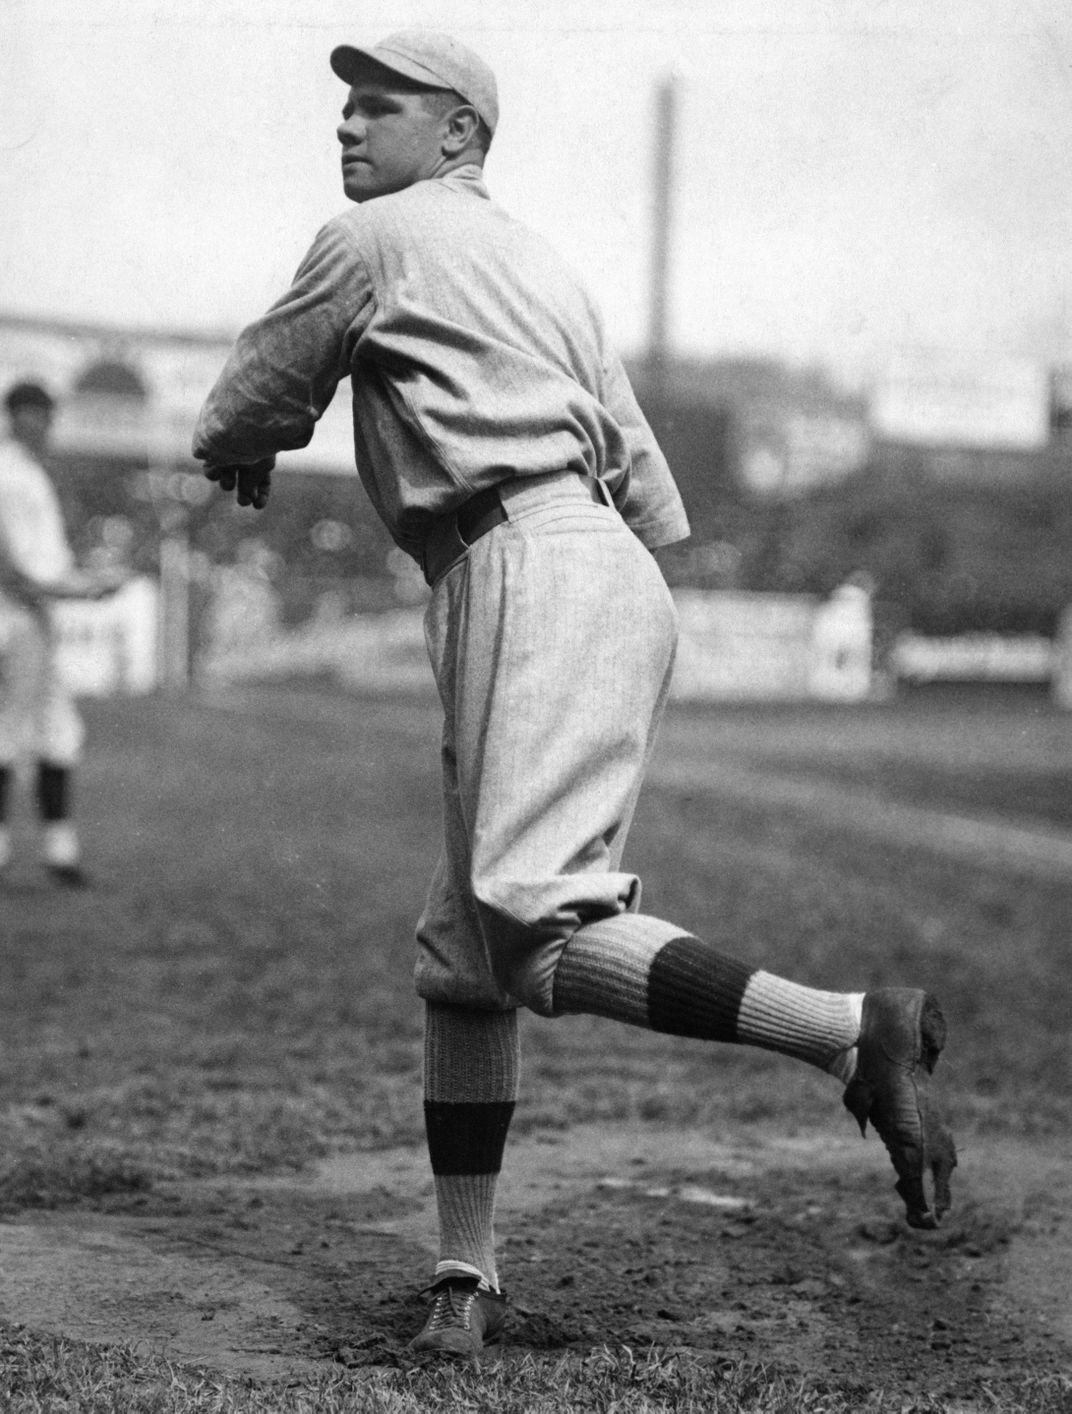 Babe Ruth warming up for pitching